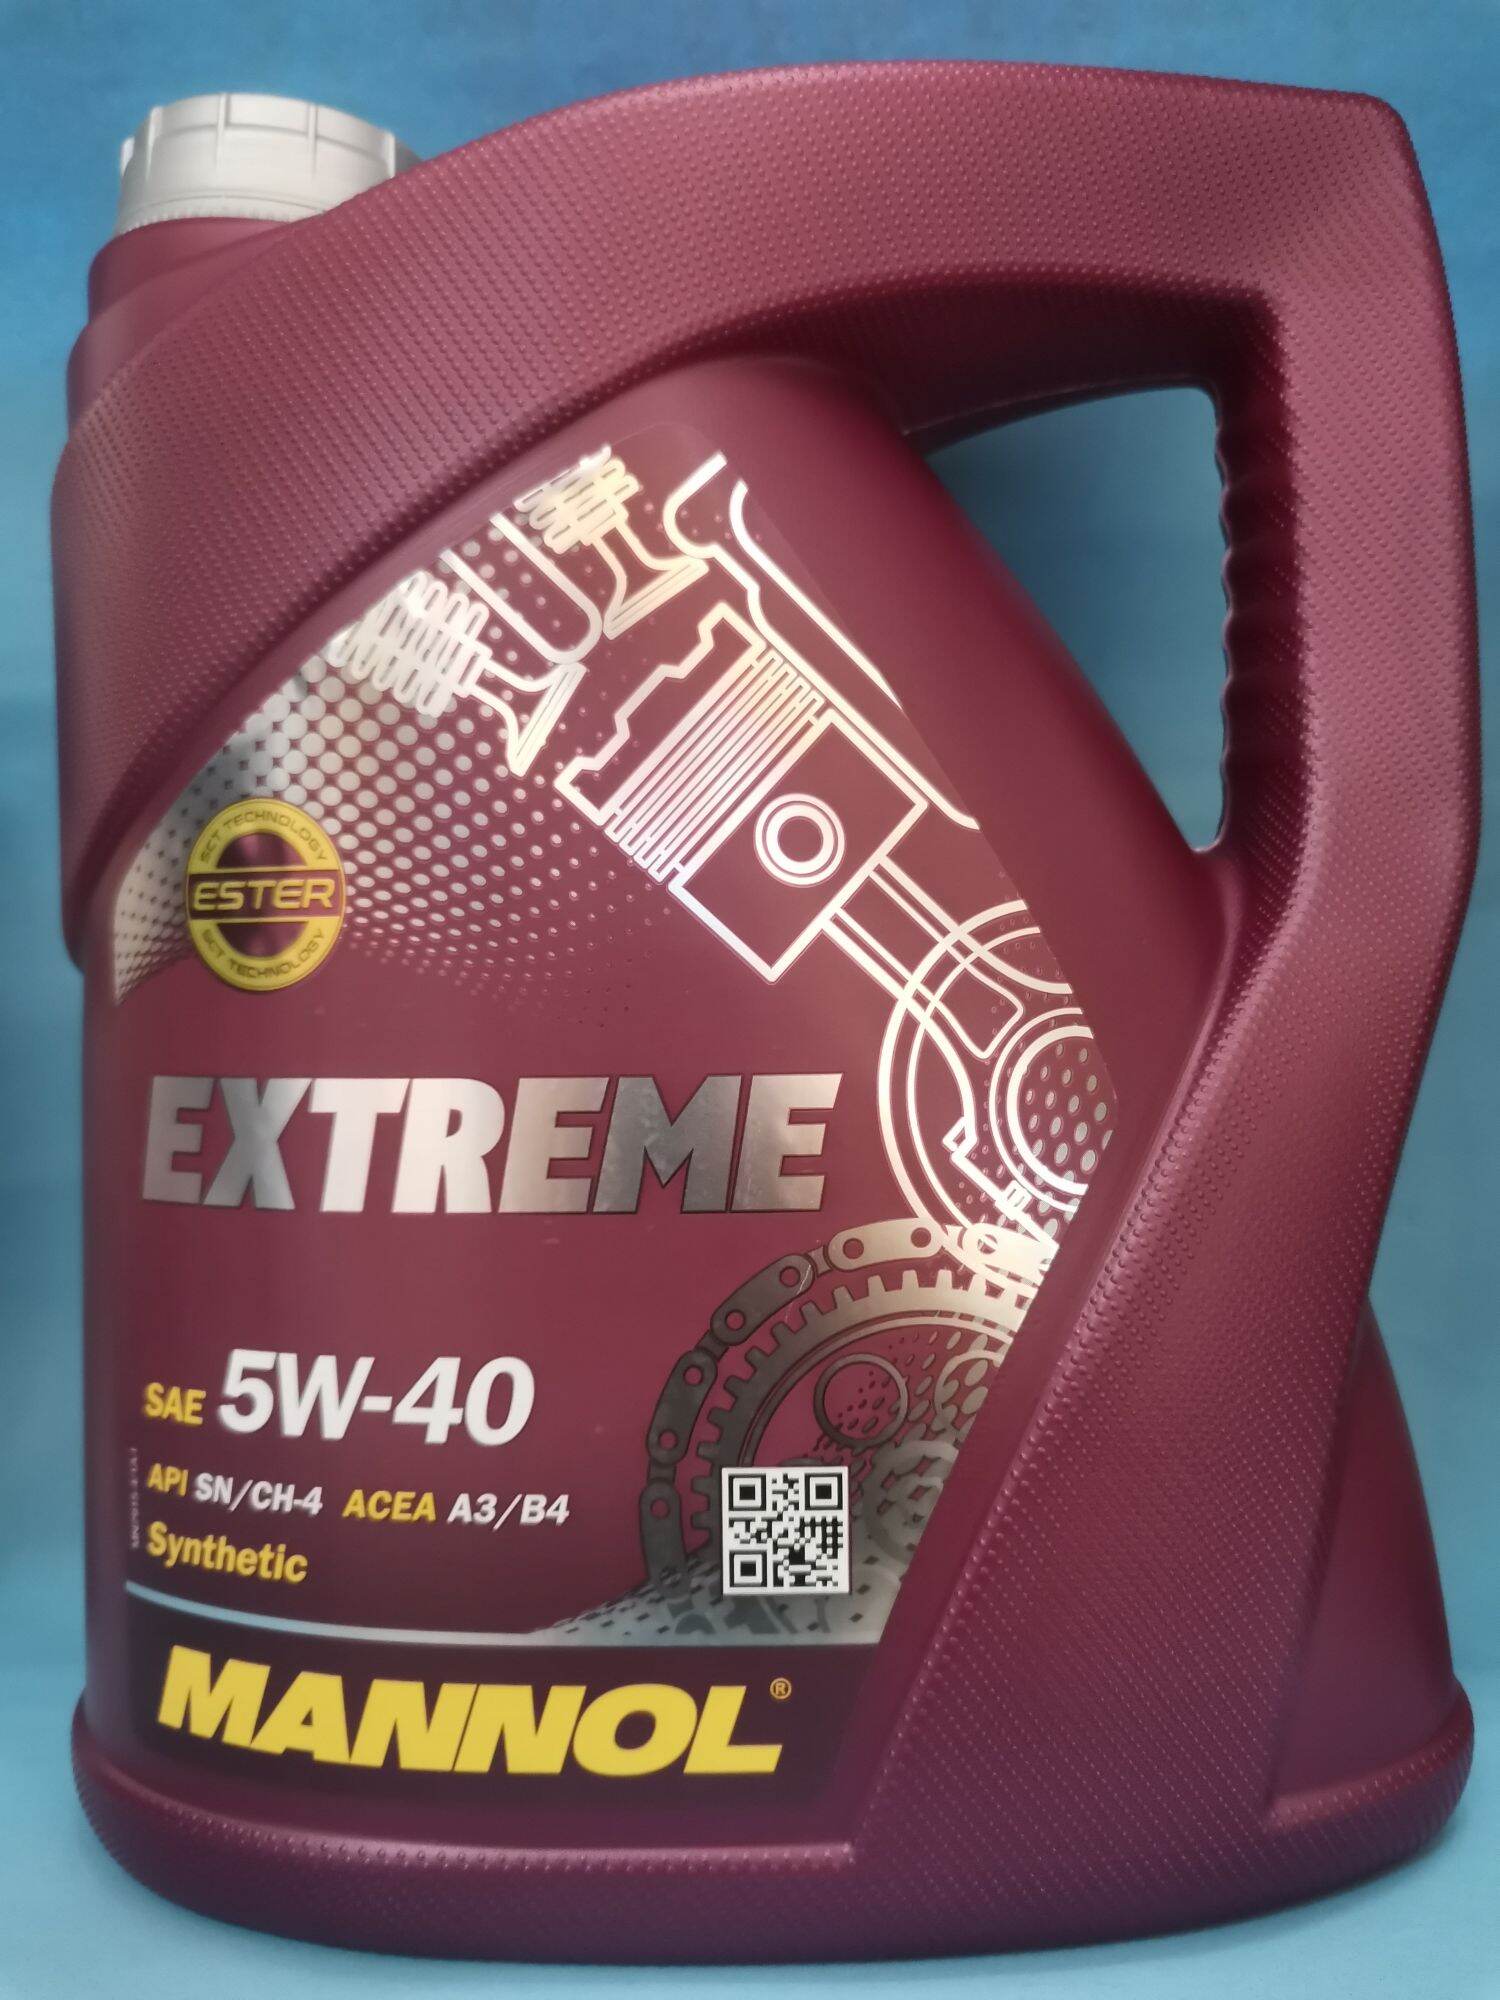 MANNOL Extreme 7915 SAE 5W-40 Fully Synthetic Engine Oil (4L)